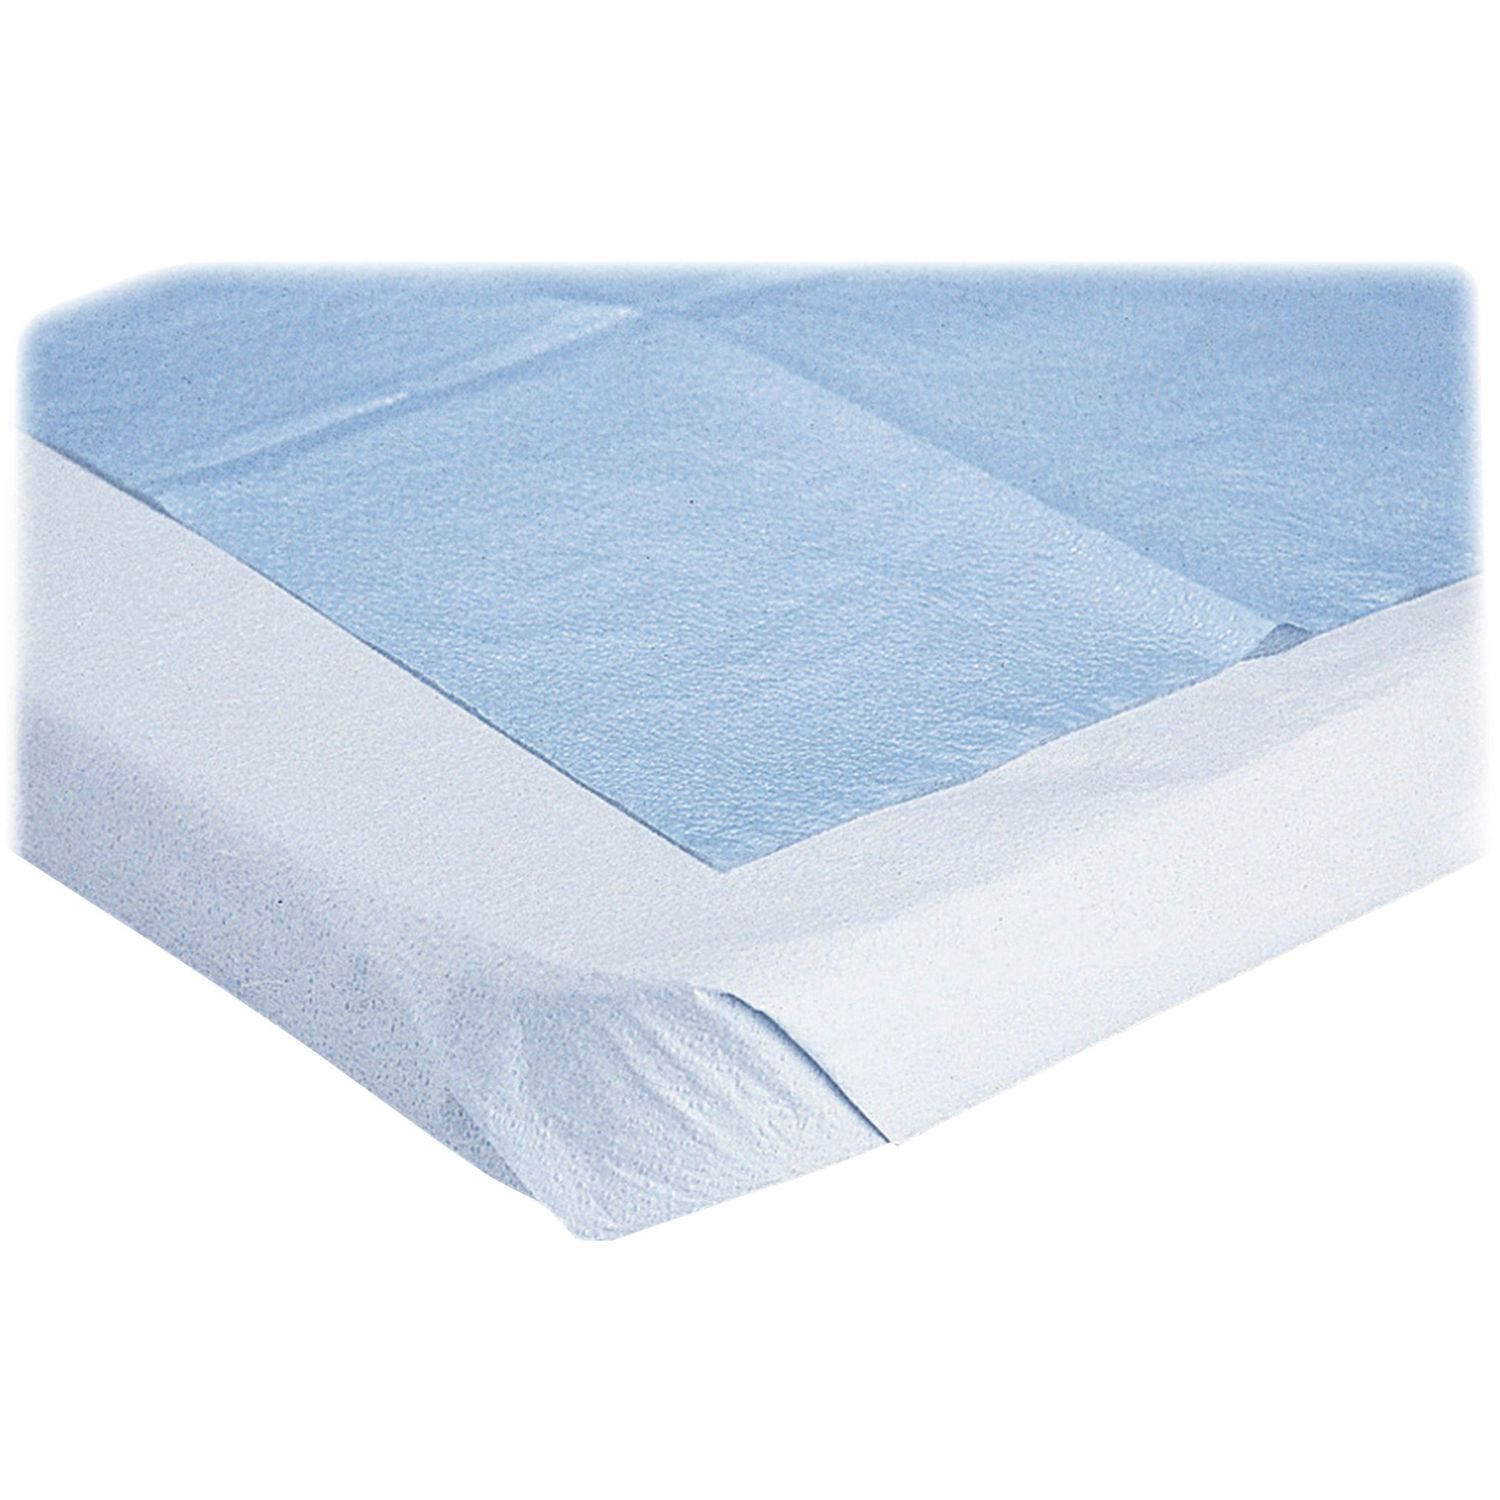 Disposable 2-Ply Drape Sheets Tissue, For Medical, White, 50 / Box